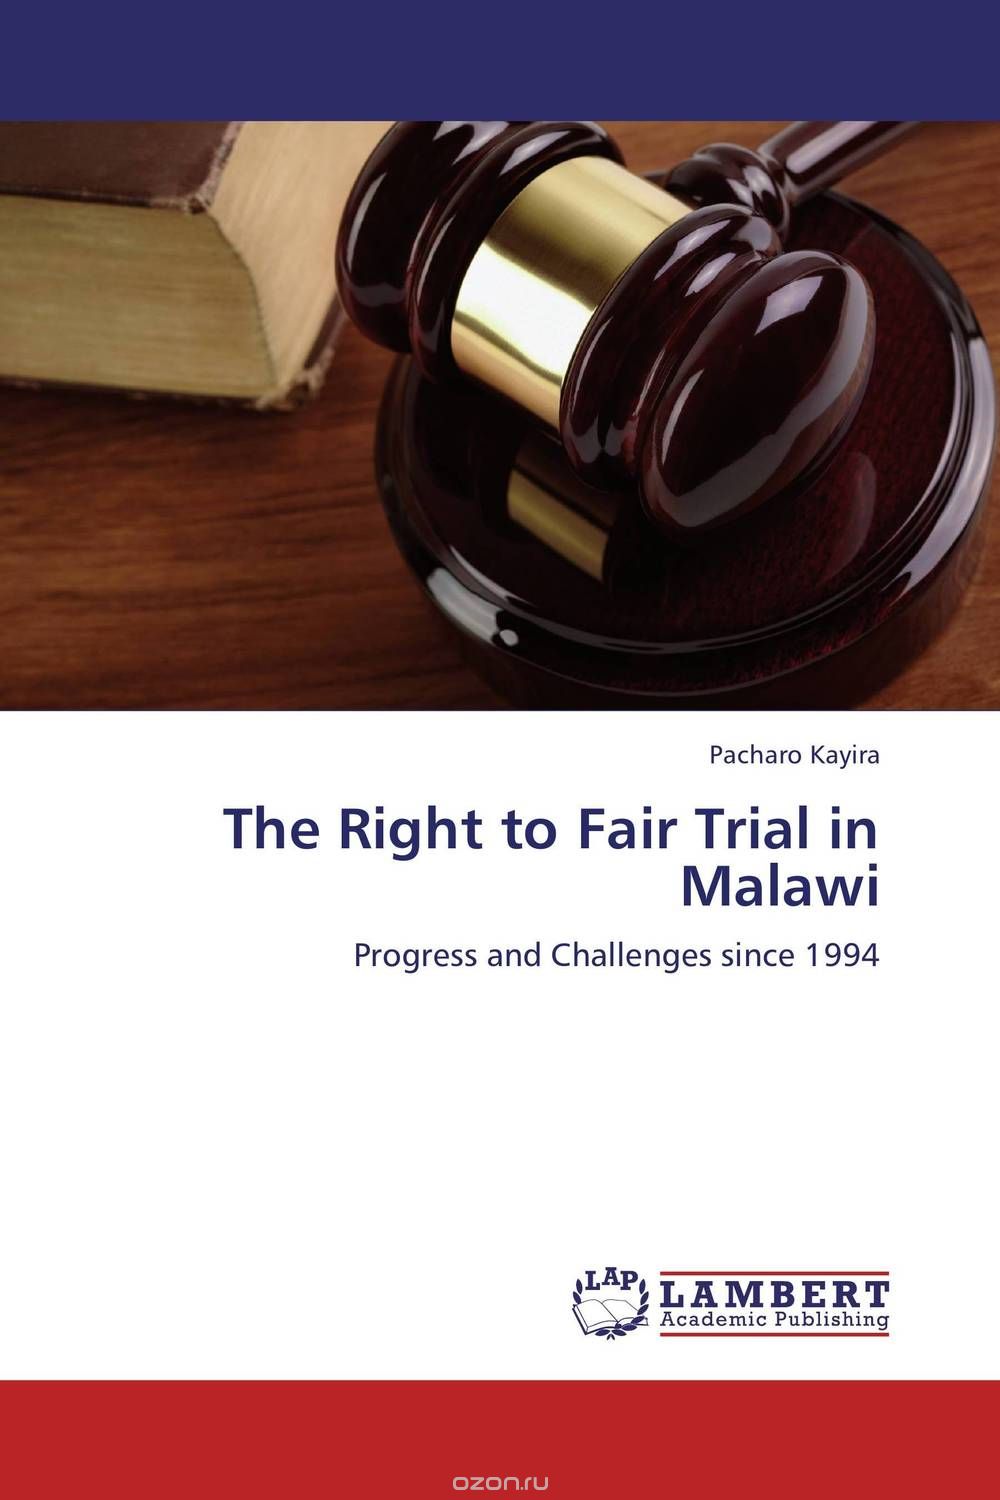 The Right to Fair Trial in Malawi